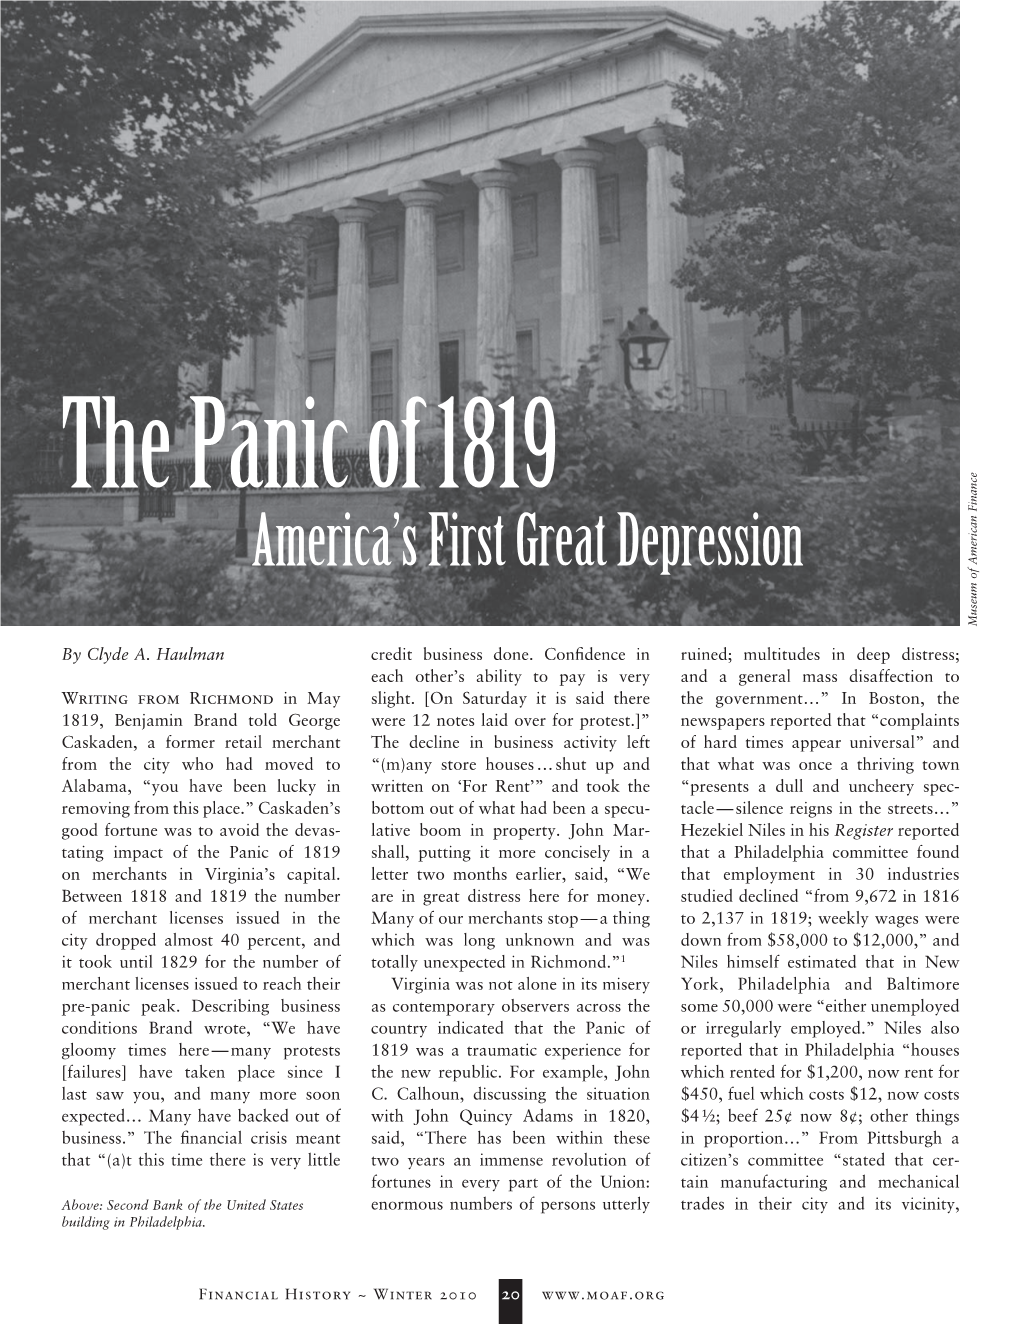 The Panic of 1819: America's First Great Depression